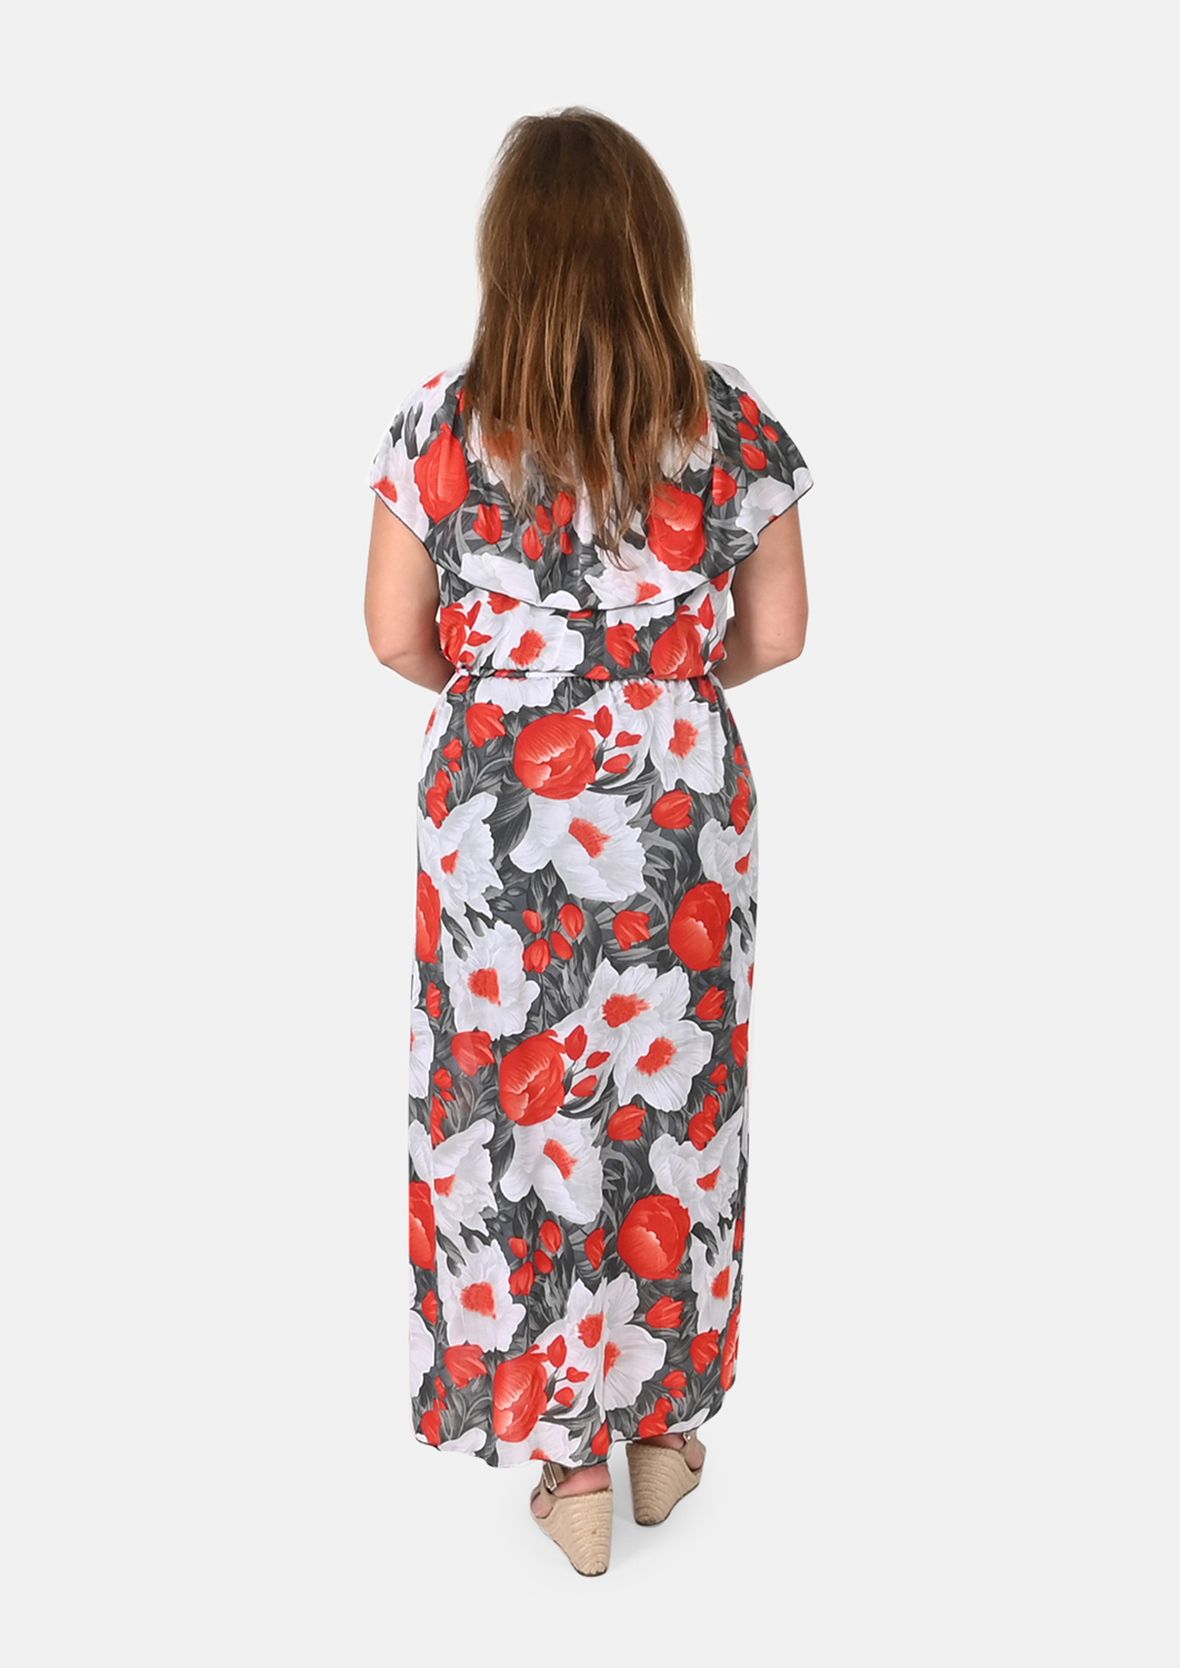 Convertible Floral Dress with Slits & Belt